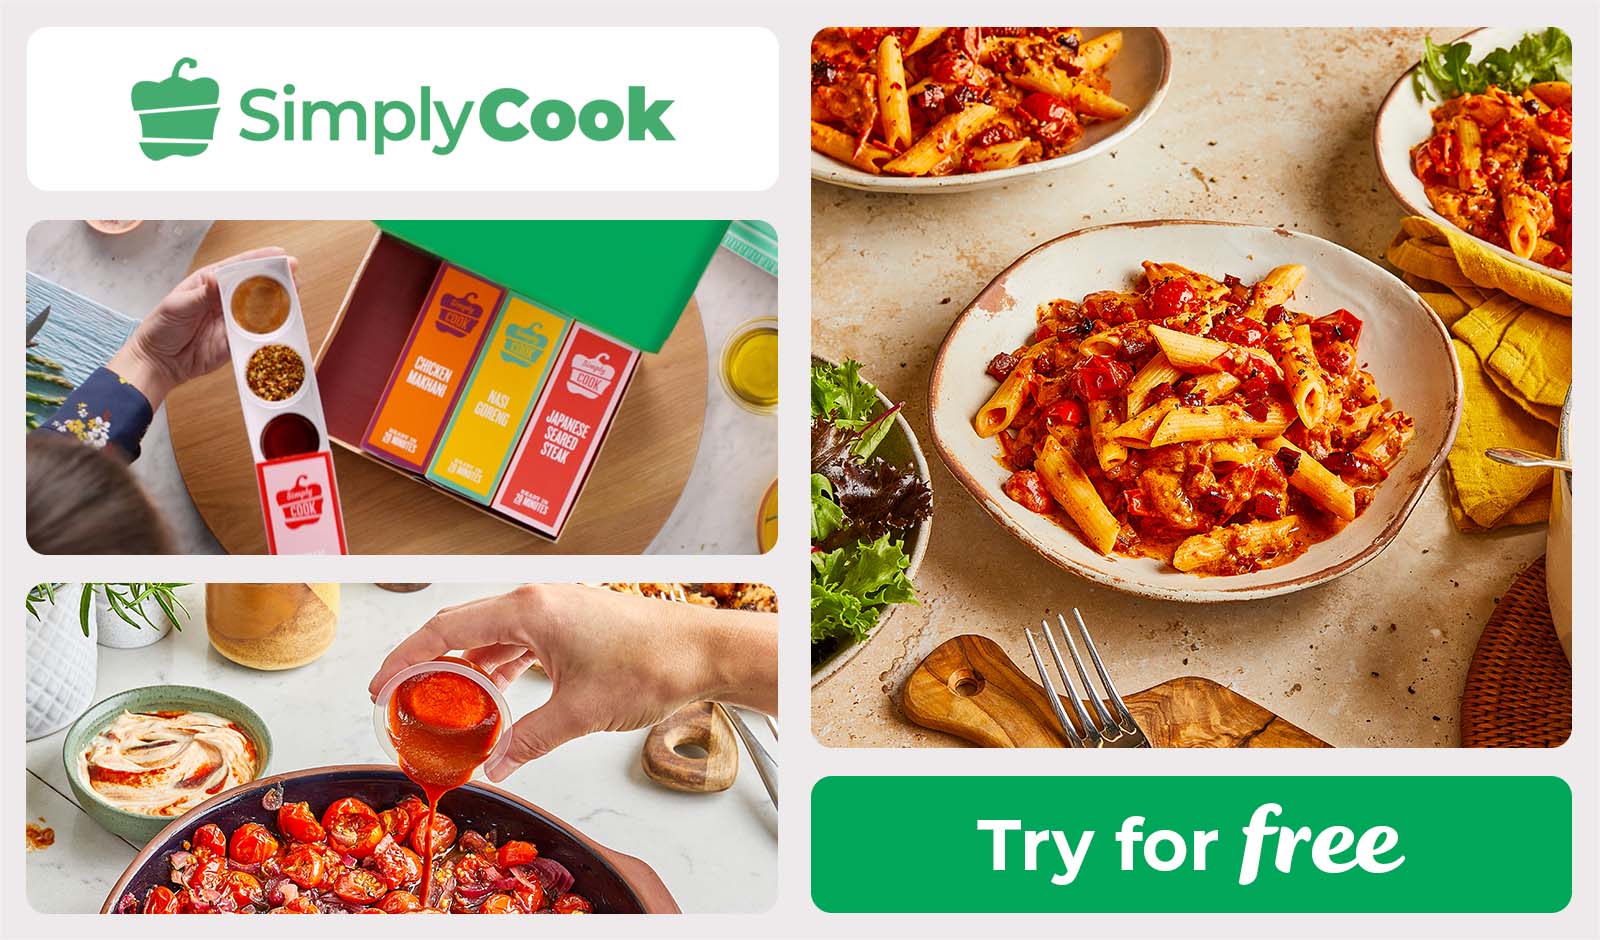 Try SimplyCook for free!